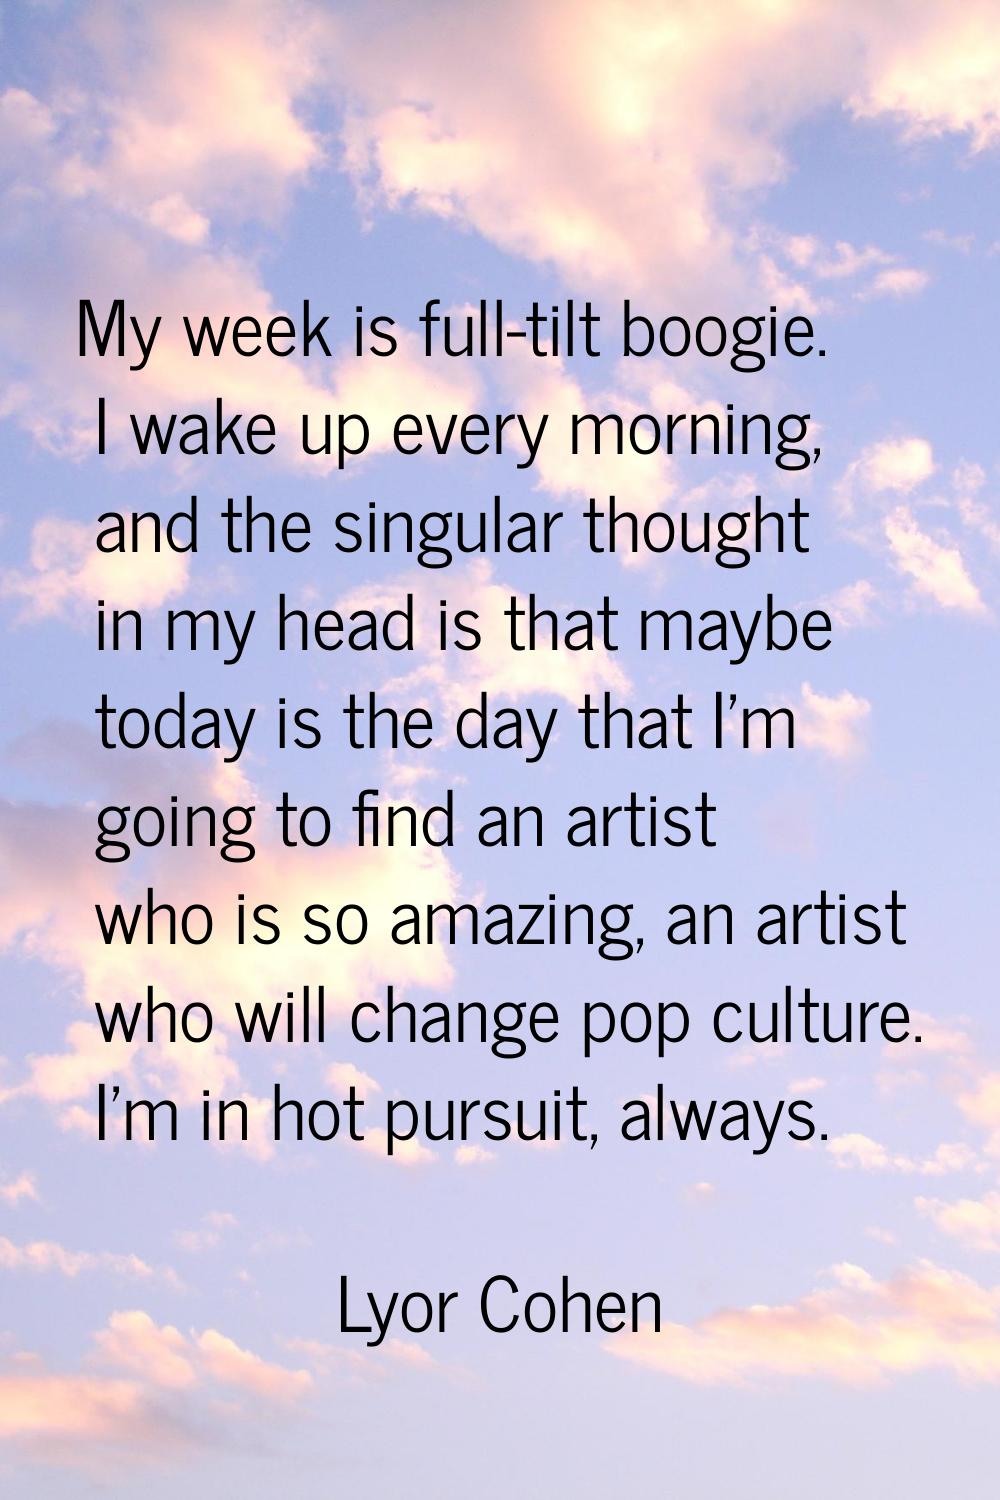 My week is full-tilt boogie. I wake up every morning, and the singular thought in my head is that m